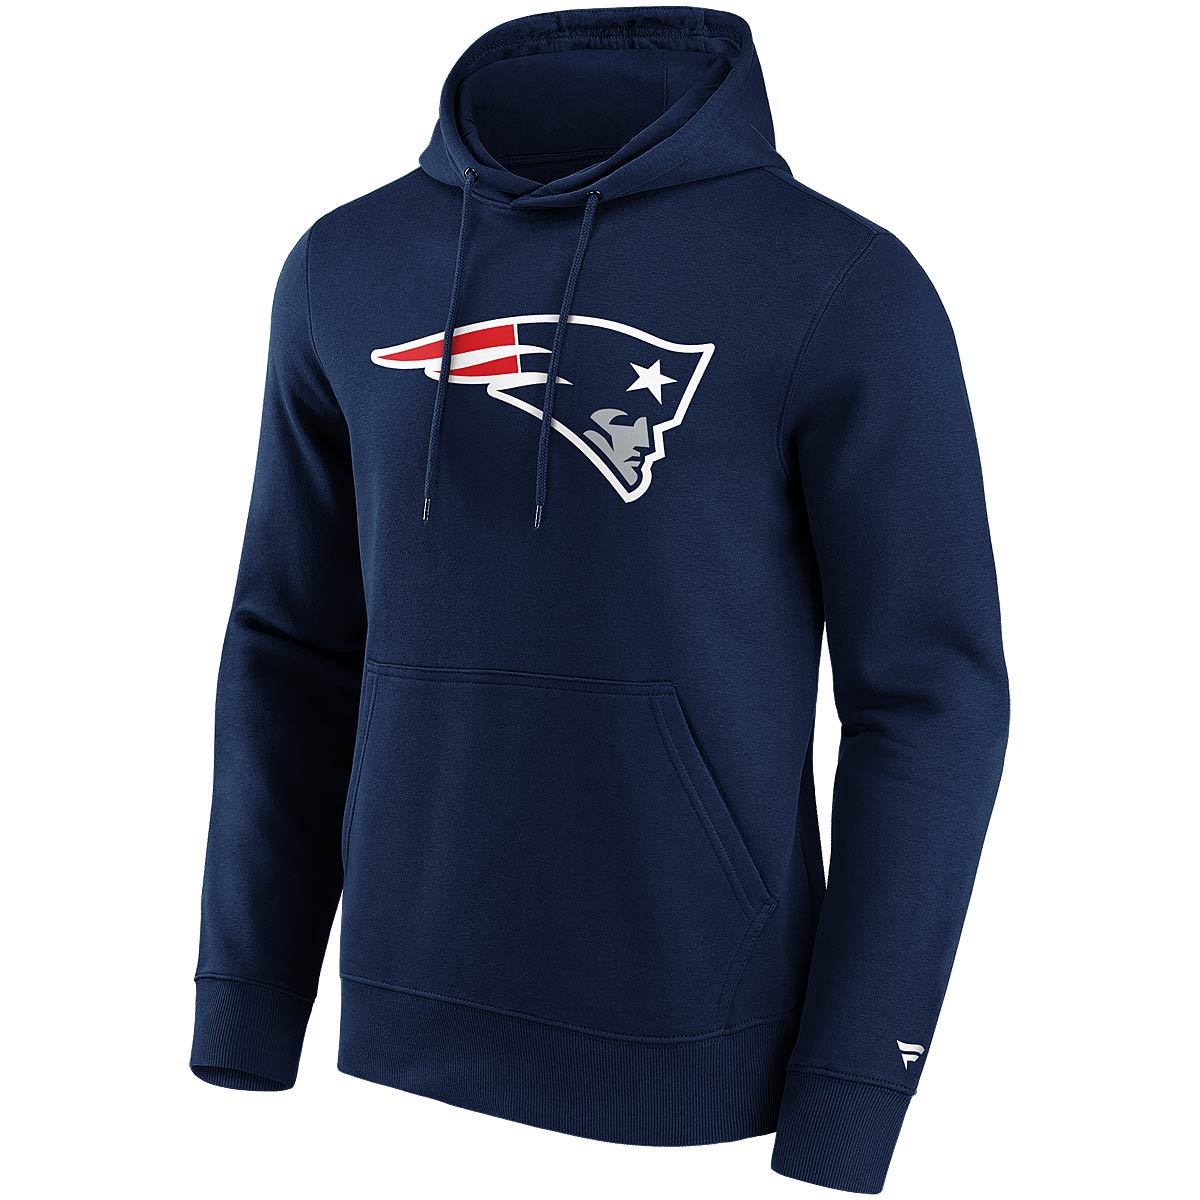 Image of Nike NFL New England Patriots Primary Logo Graphic Hoody, Navy